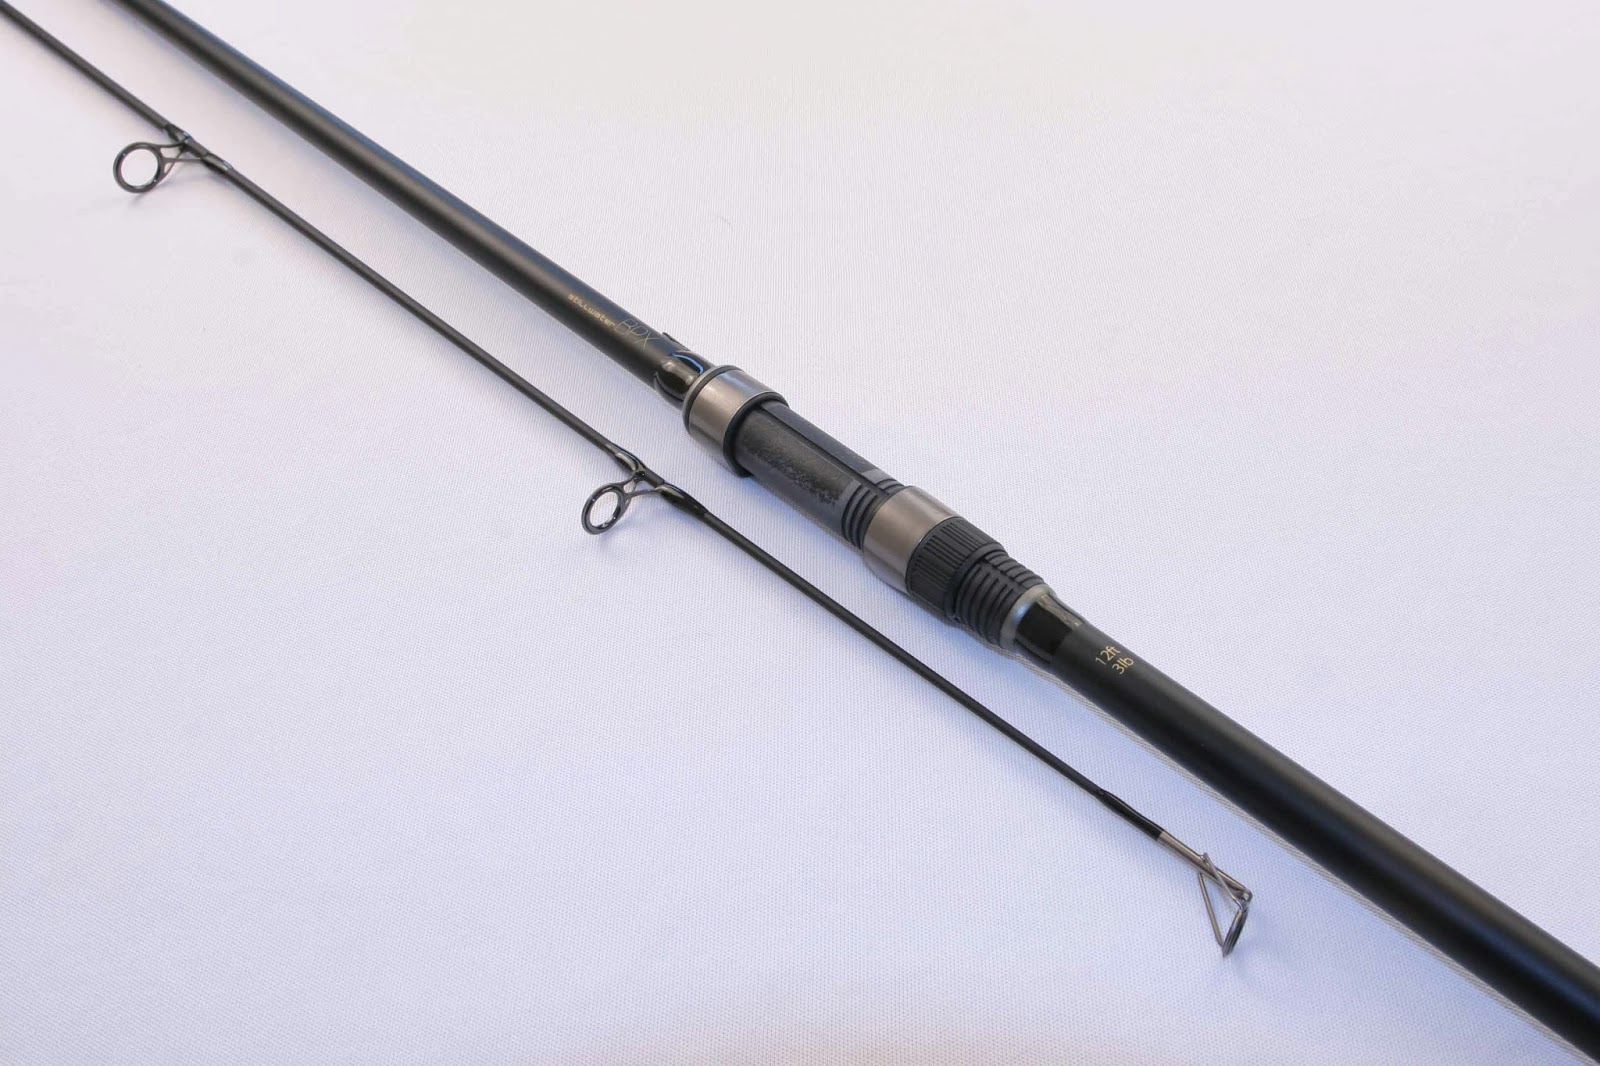 Duncan Charmans World of Angling: QUICK COMPARISON 3LB T/C CARP RODS FOR  UNDER £100 tested by DUNCAN CHARMAN